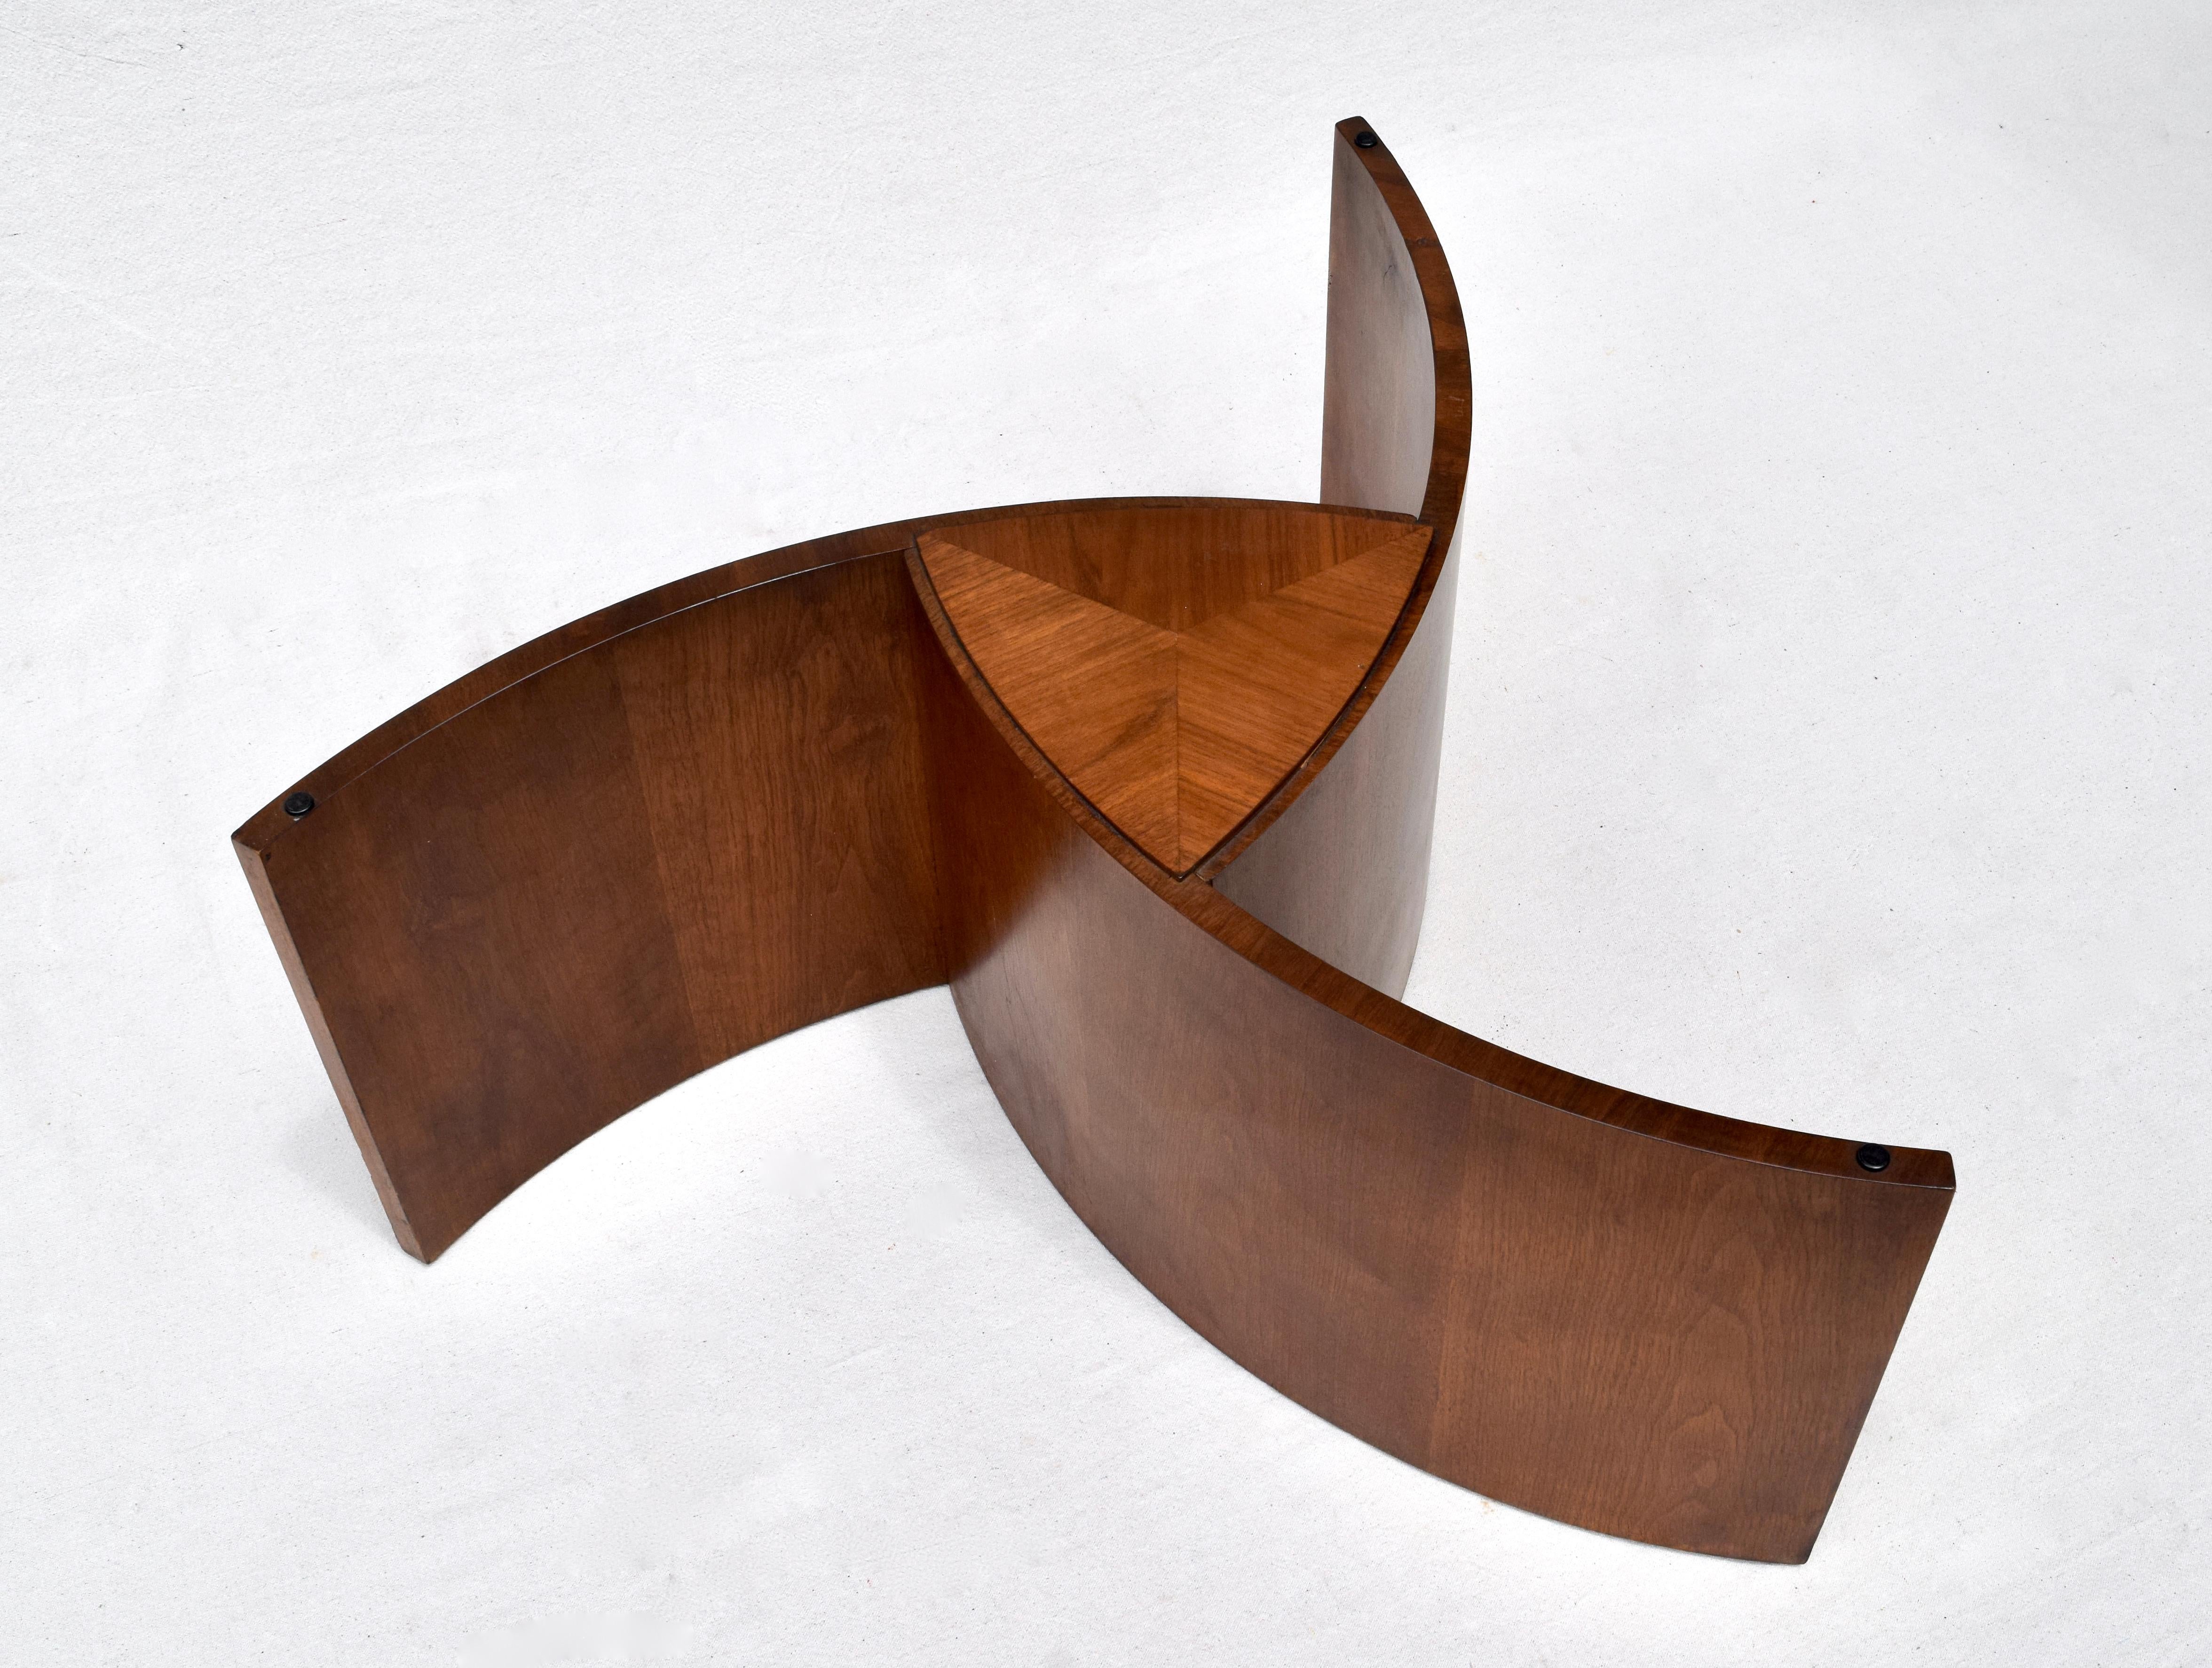 1960's mid century glass and walnut propeller base form coffee table in the manner of Vladimir Kagan designs. Warm original finish and original 5/8